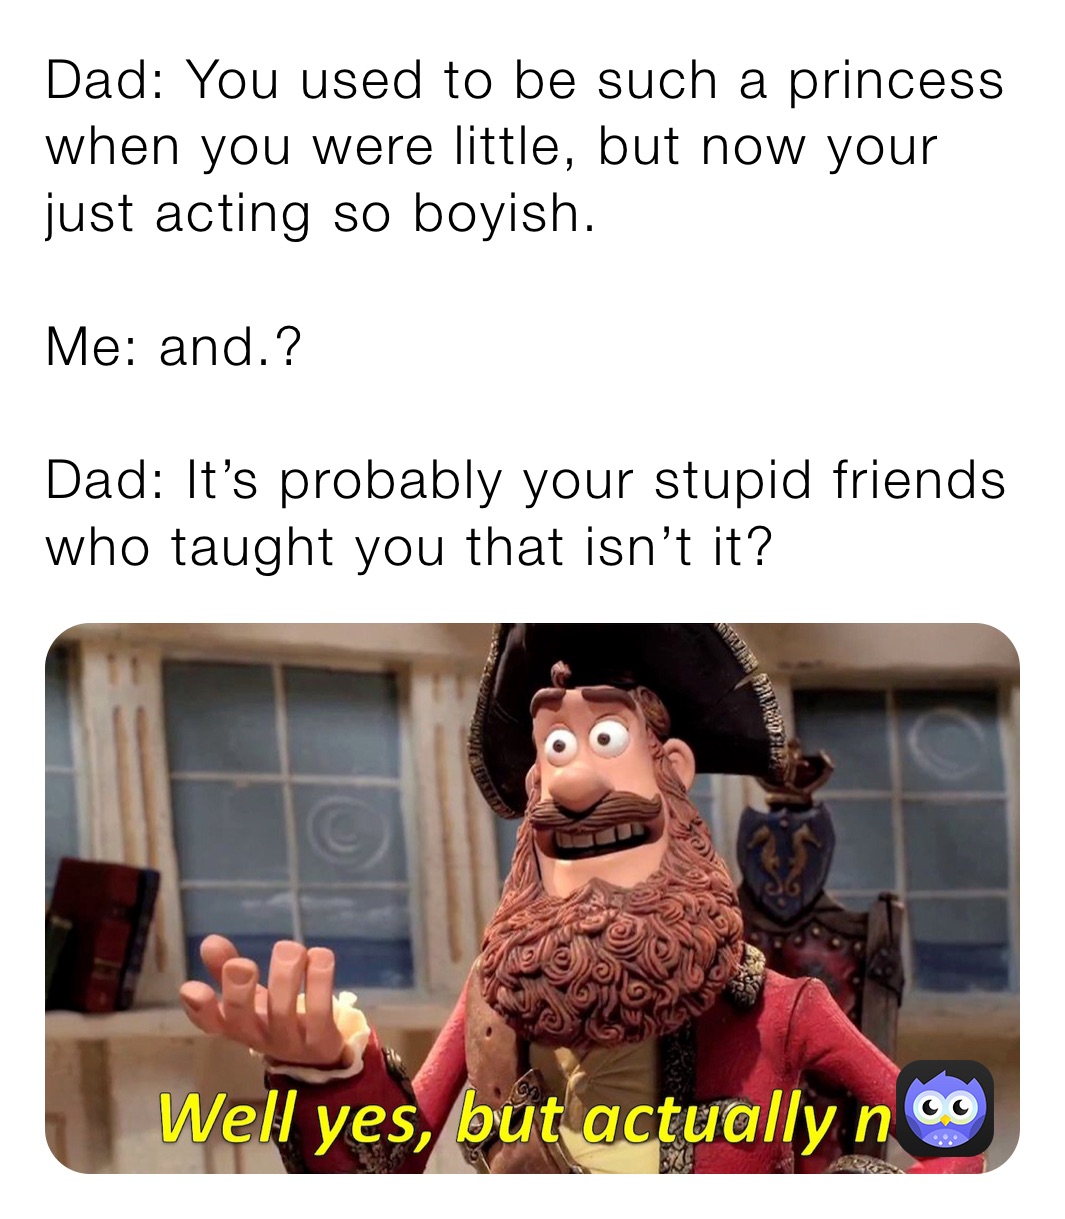 Dad: You used to be such a princess when you were little, but now your just acting so boyish.

Me: and.?

Dad: It’s probably your stupid friends who taught you that isn’t it?